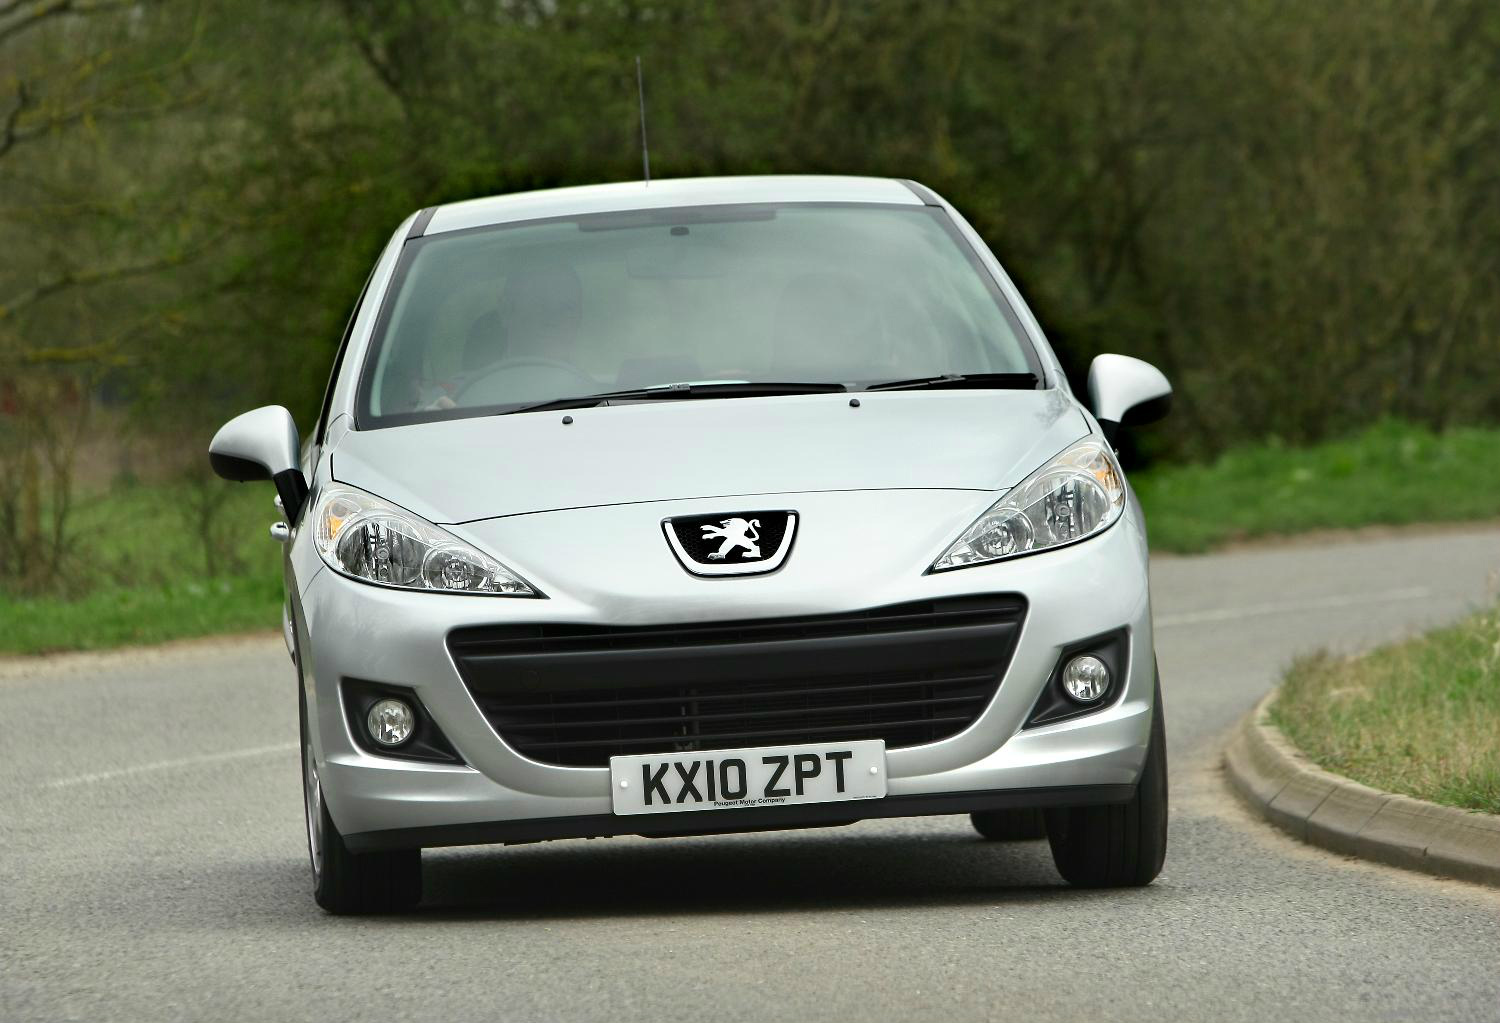 Peugeot 207 is most expensive small hatchback to service and repair